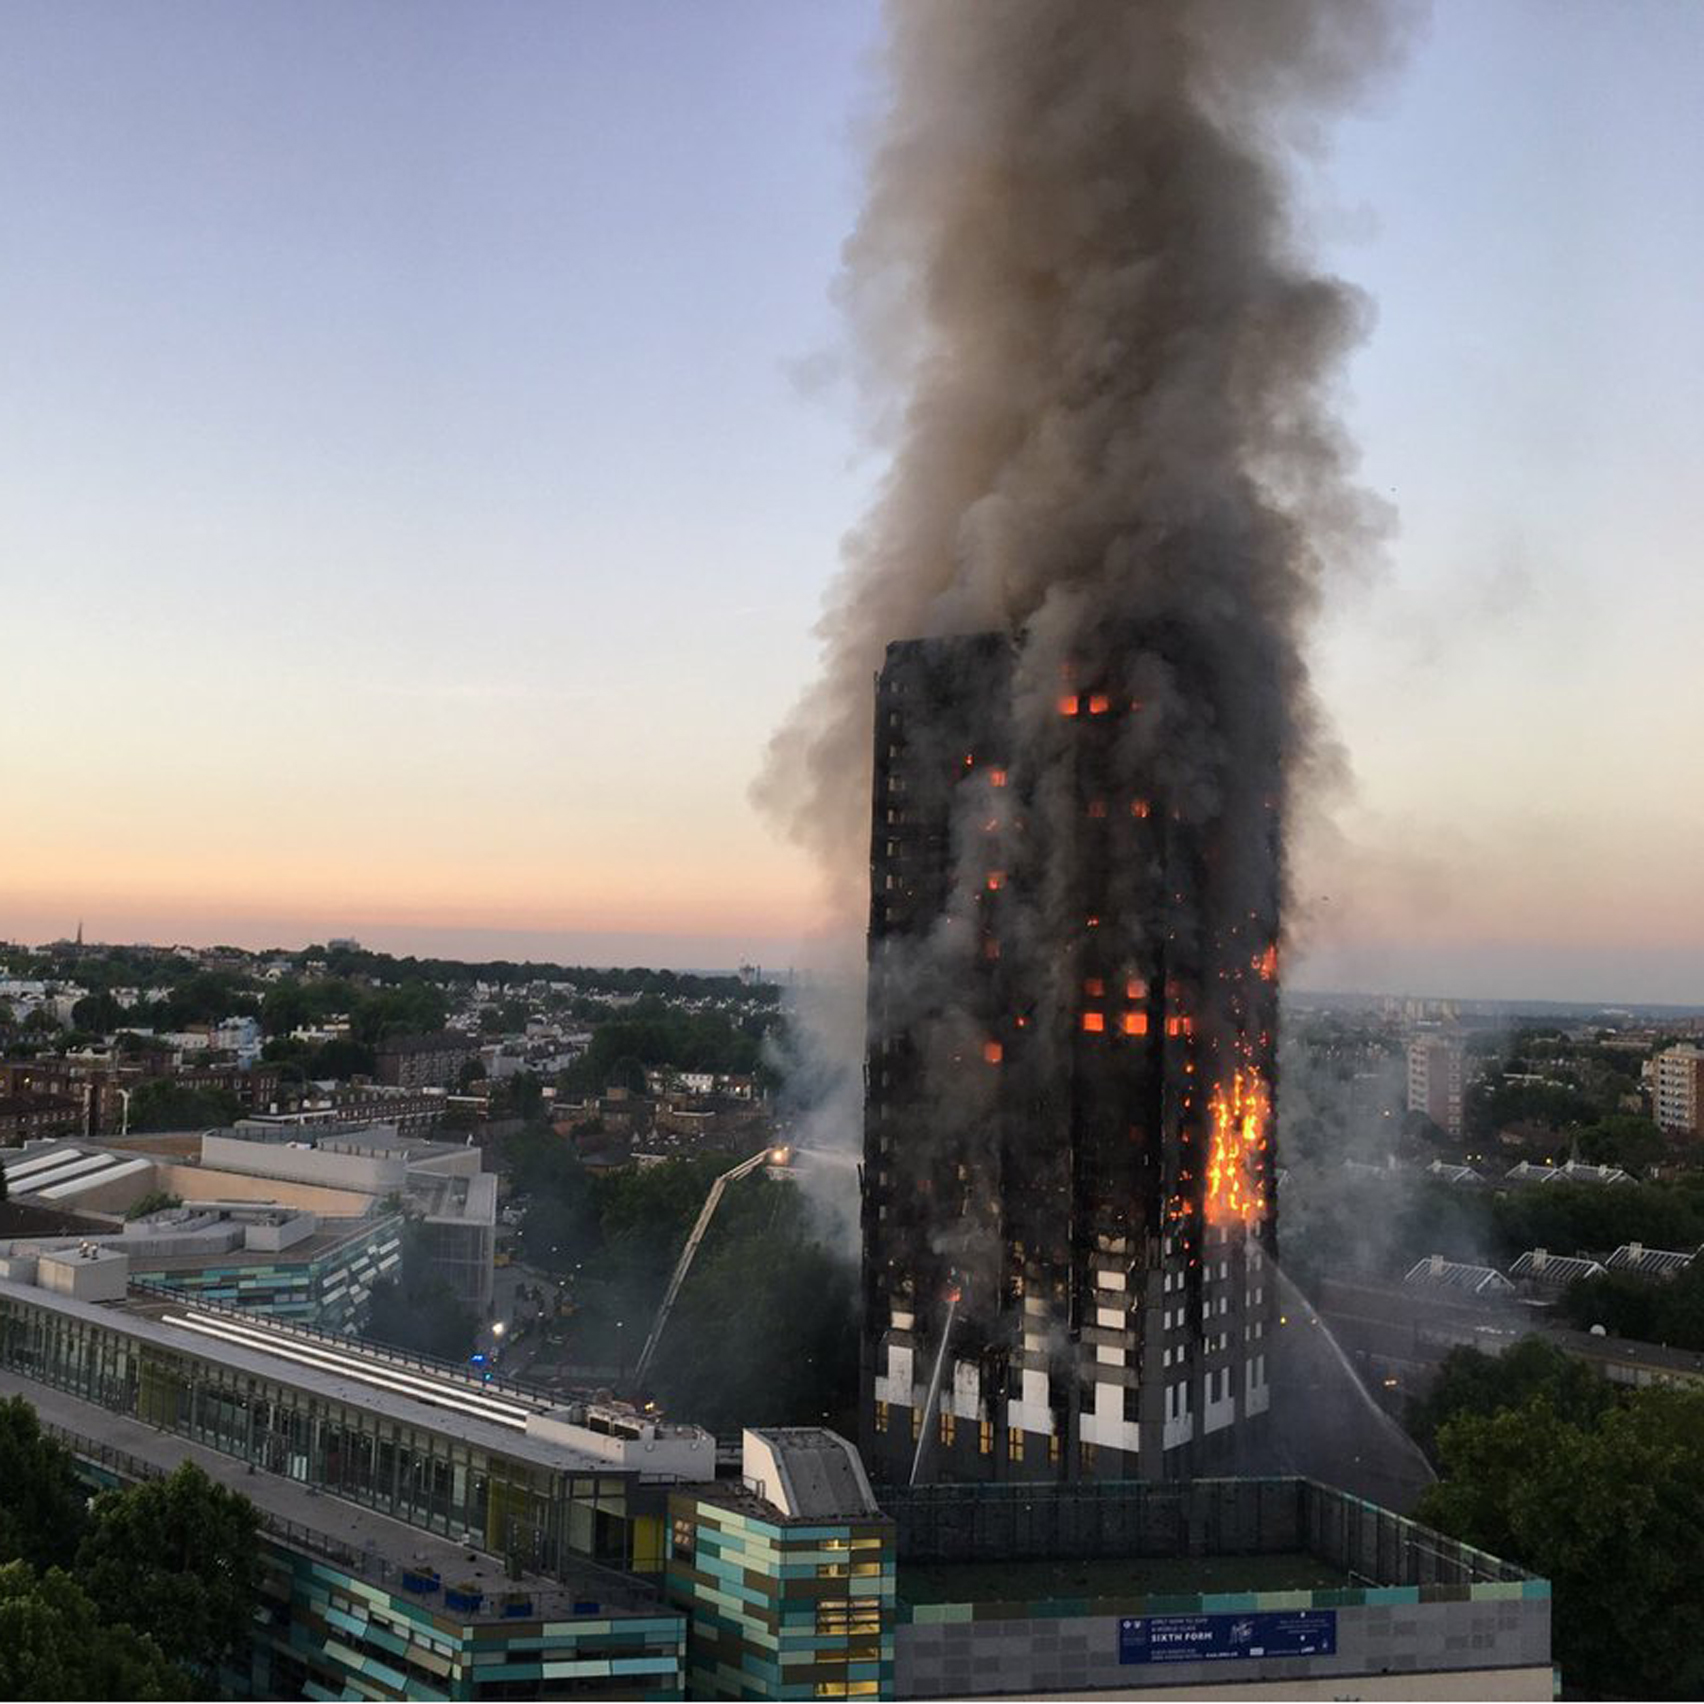 Theresa May orders public inquiry into Grenfell Tower fire as renovations blamed